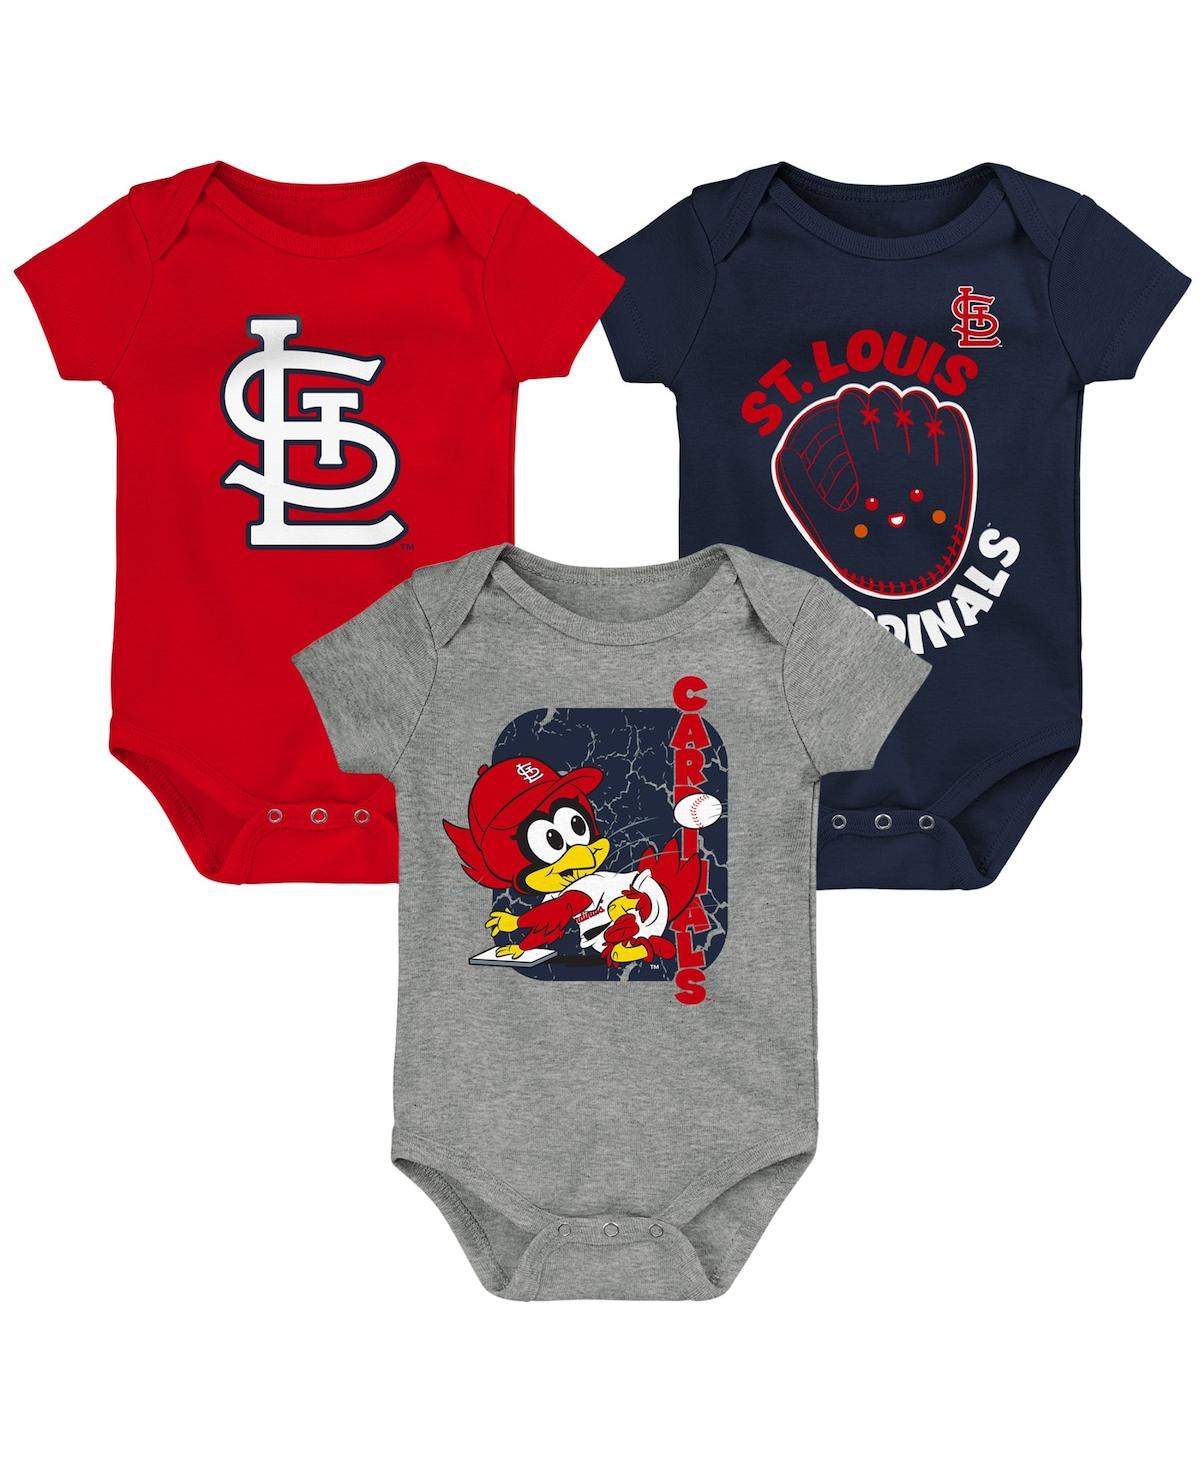 Shop Outerstuff Newborn And Infant Boys And Girls Red, Navy, Gray St. Louis Cardinals Change Up 3-pack Bodysuit Set In Red,navy,gray